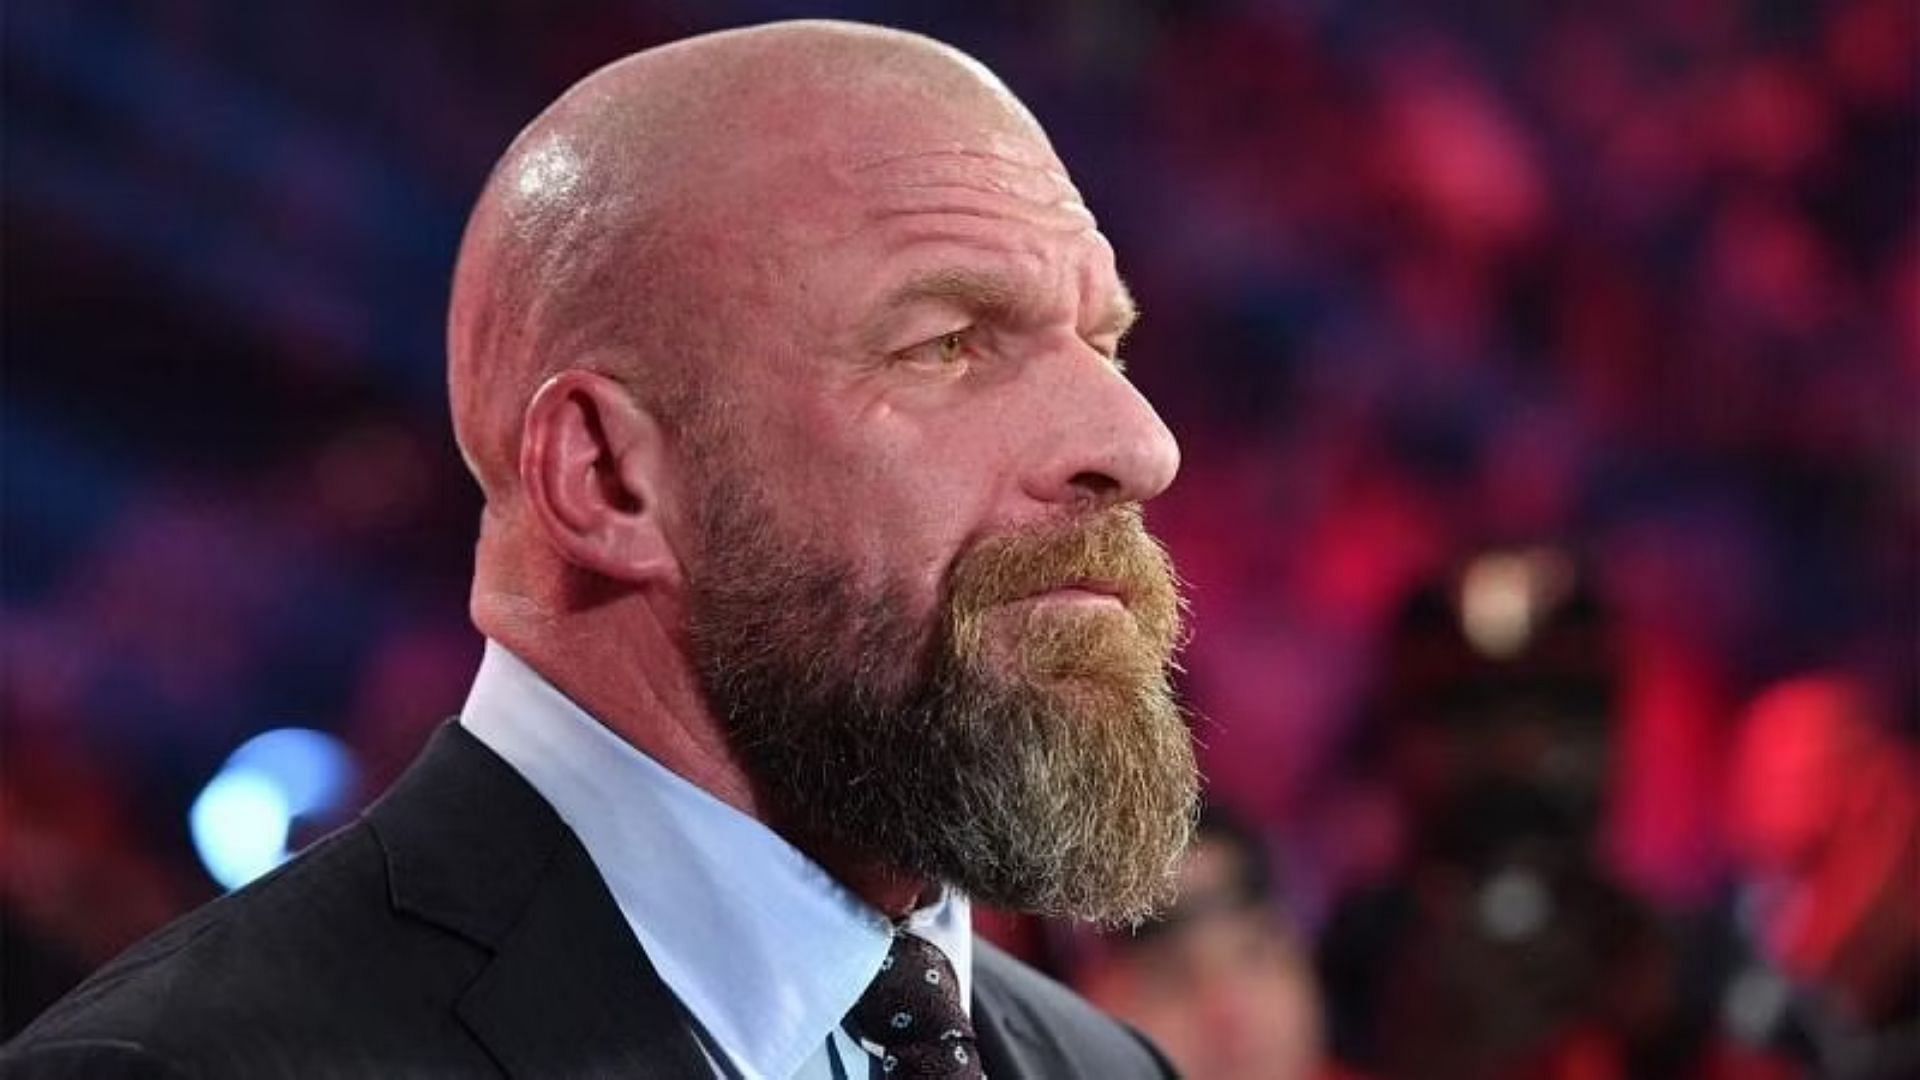 Triple H has replaced Vince McMahon as WWE